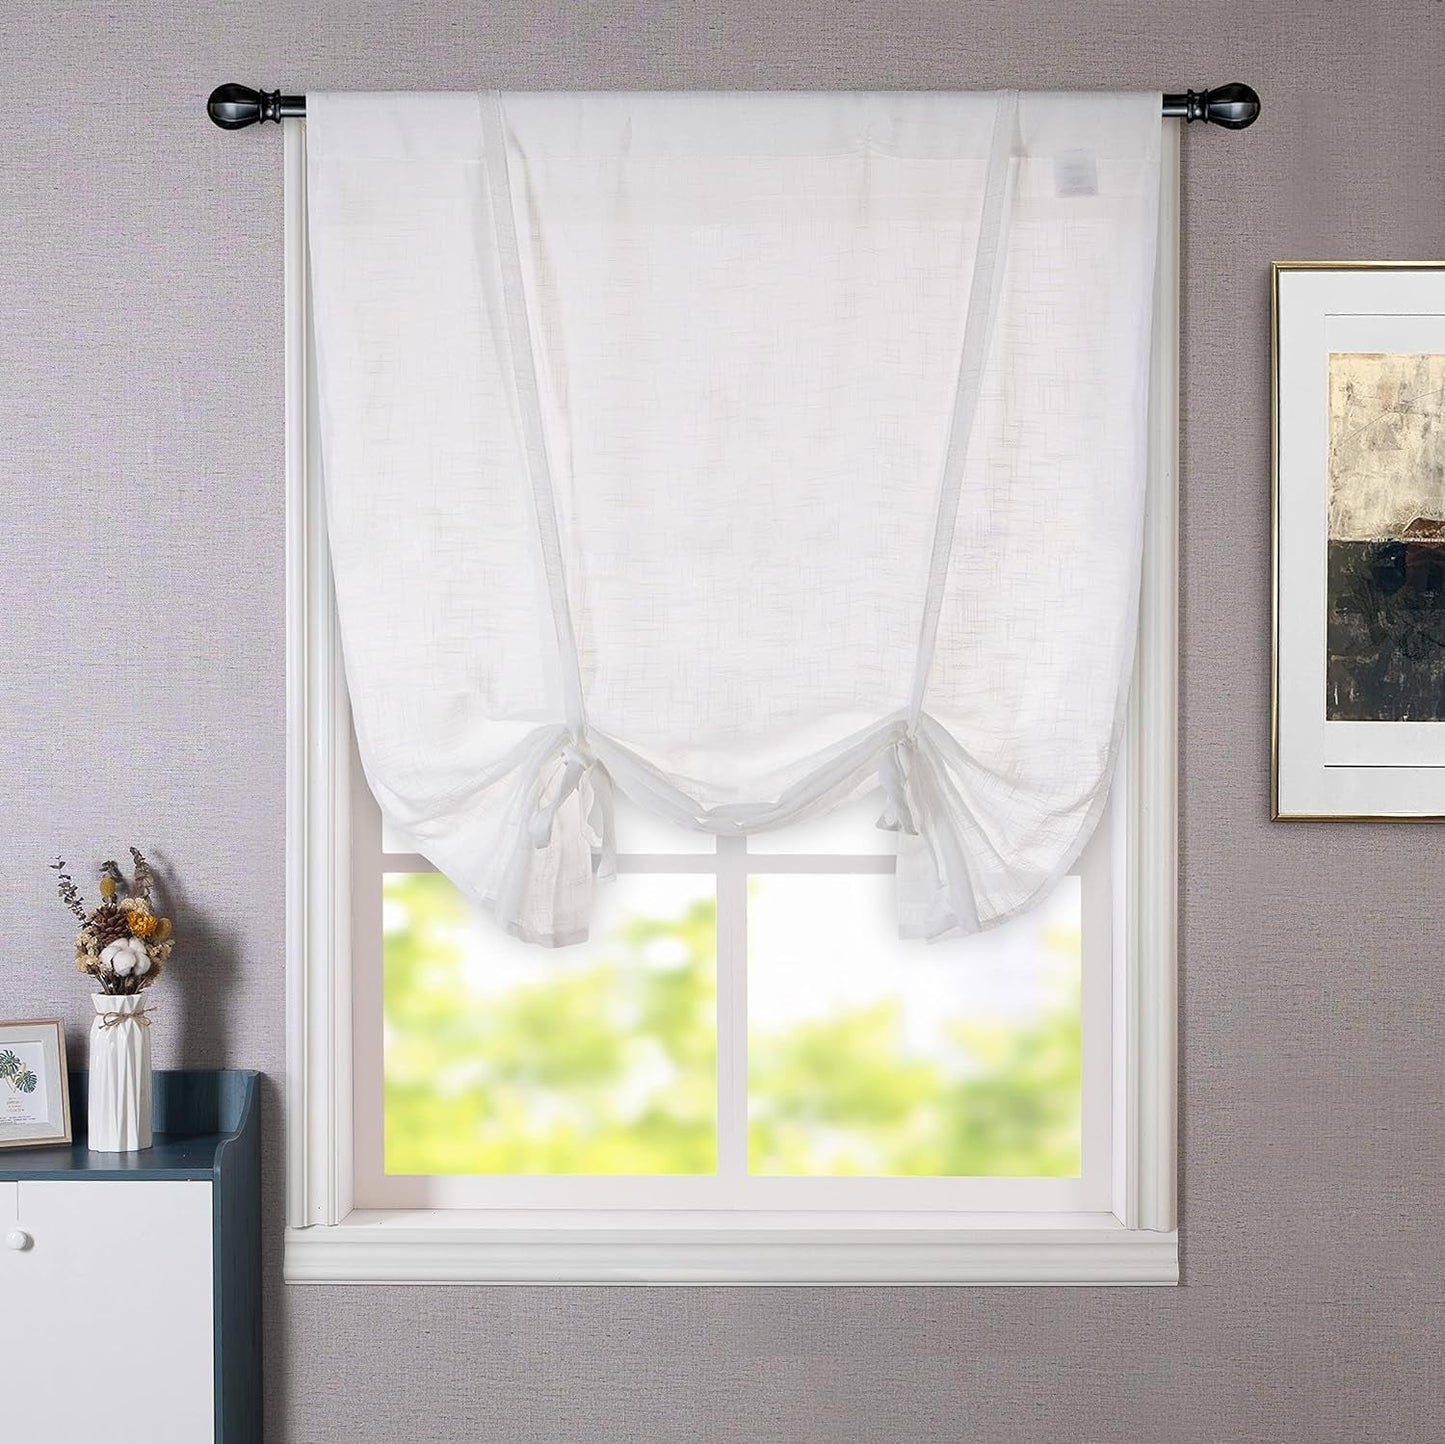 Driftaway Solid Color Linen Sheer Voile Tie up Decorative Slub Sheer Linen Curtains Adjustable Balloon Rod Pocket Window Curtains for Small Window 25 Inch by 47 Inch White